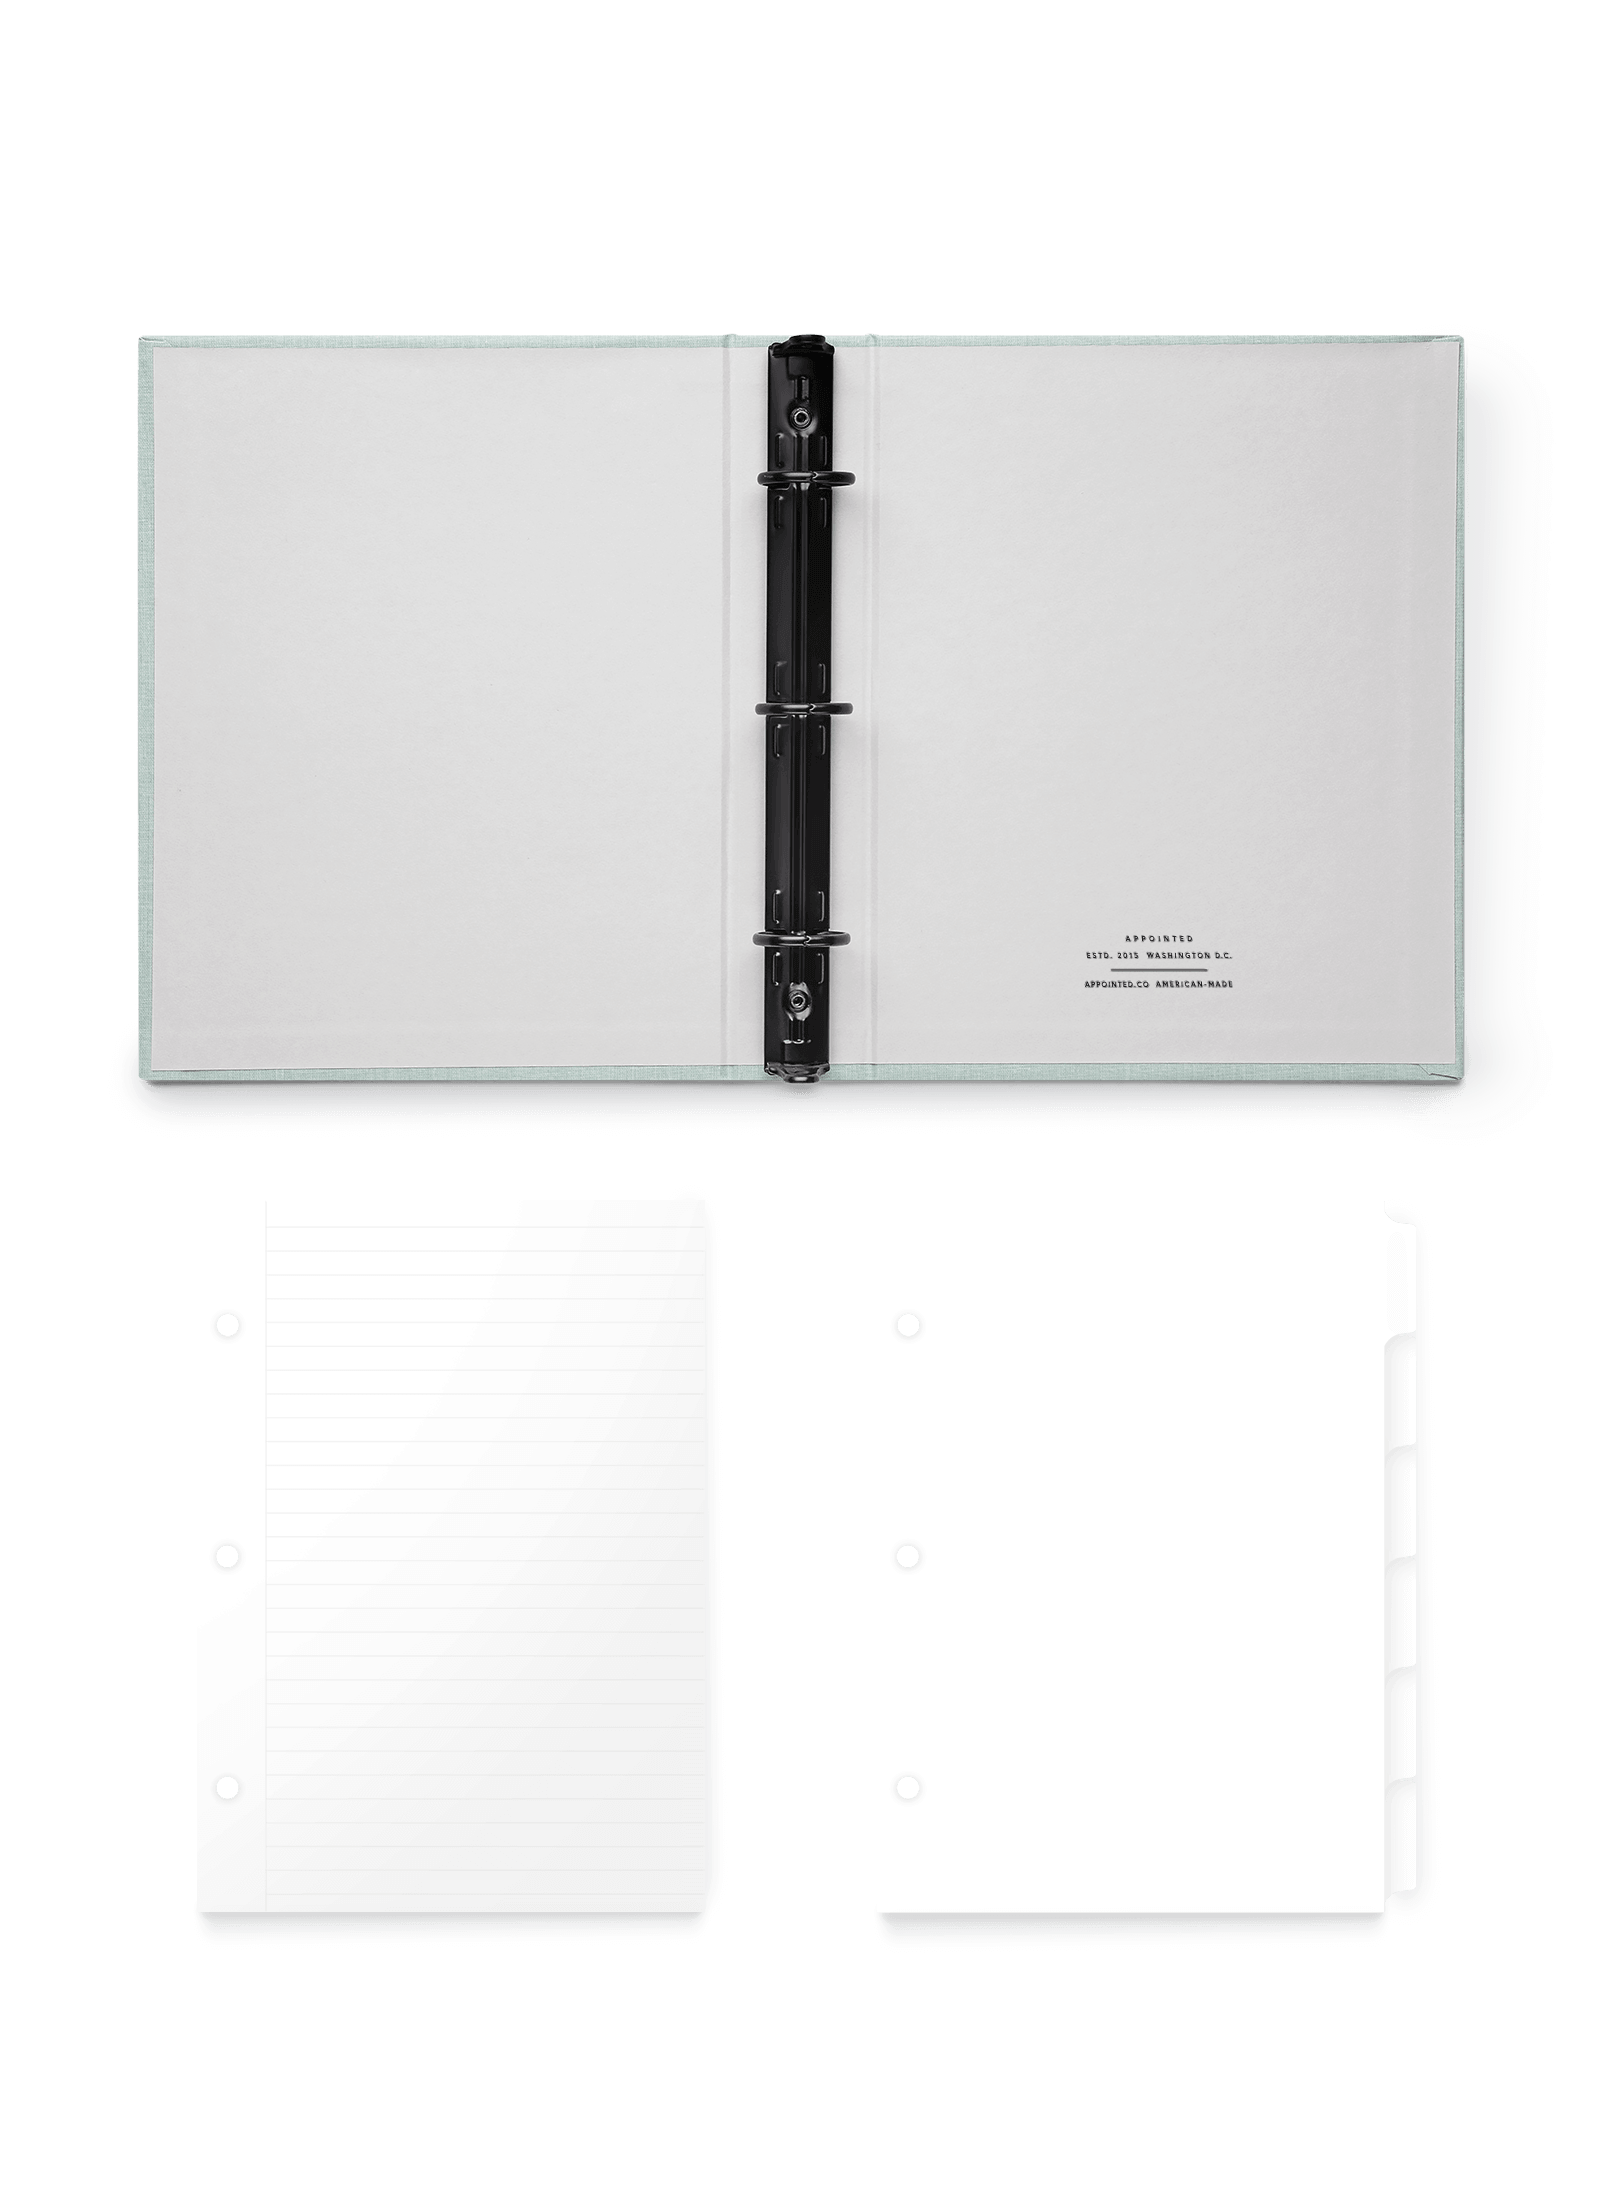 Appointed Mineral Compact Binder open flat with Lined Inserts and Tabs, front view. || Mineral Green